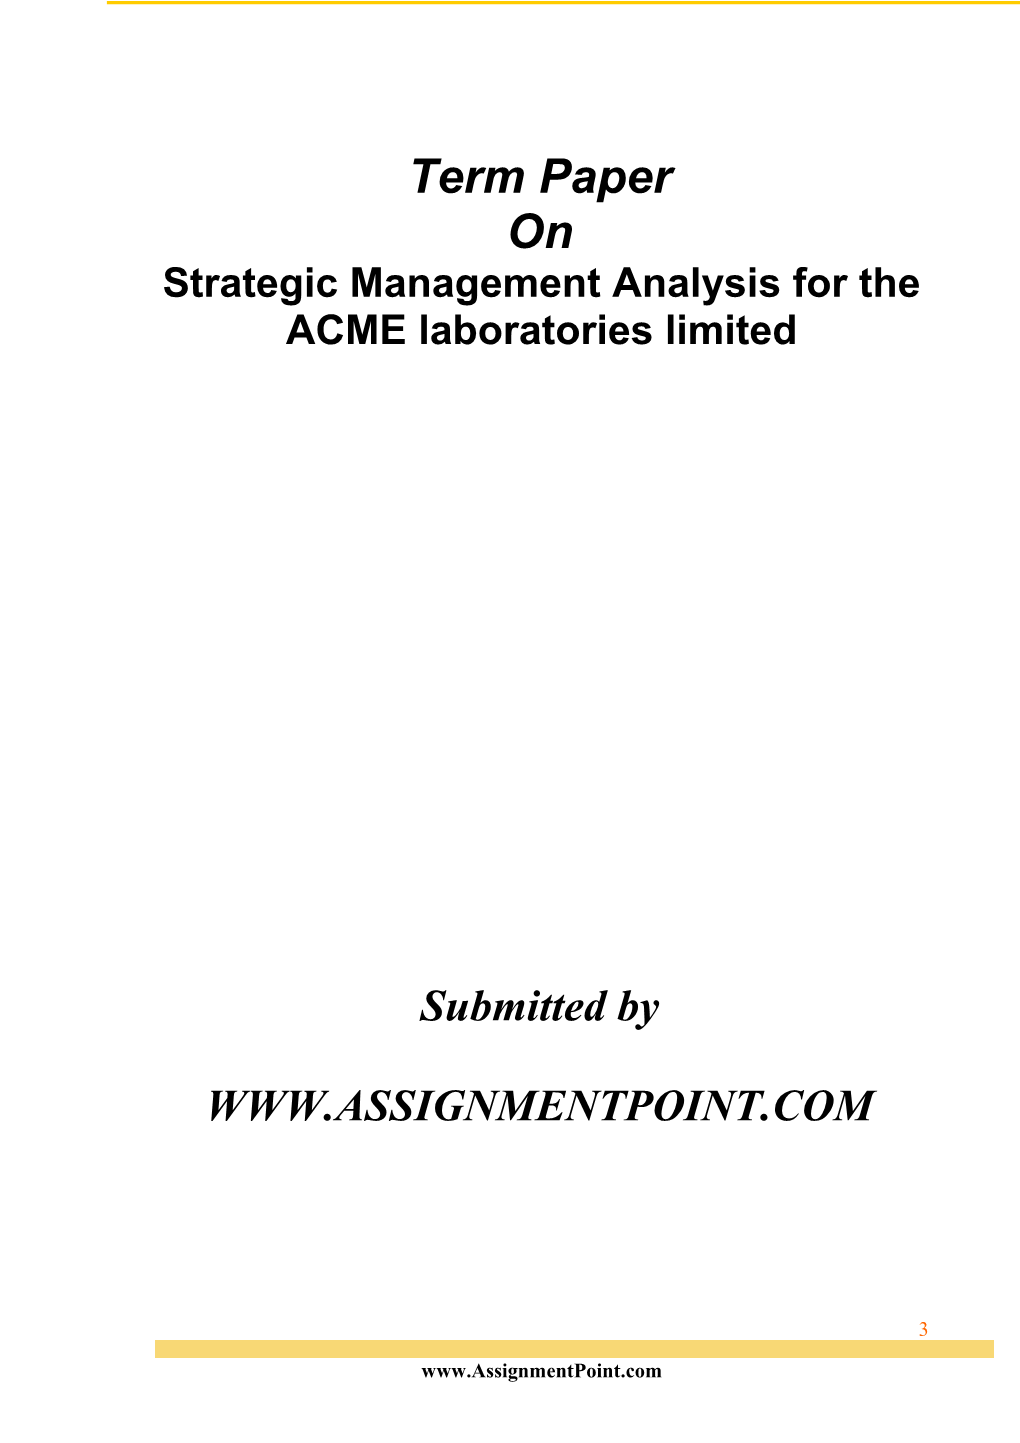 Strategic Management Analysis for the ACME Laboratories Limited